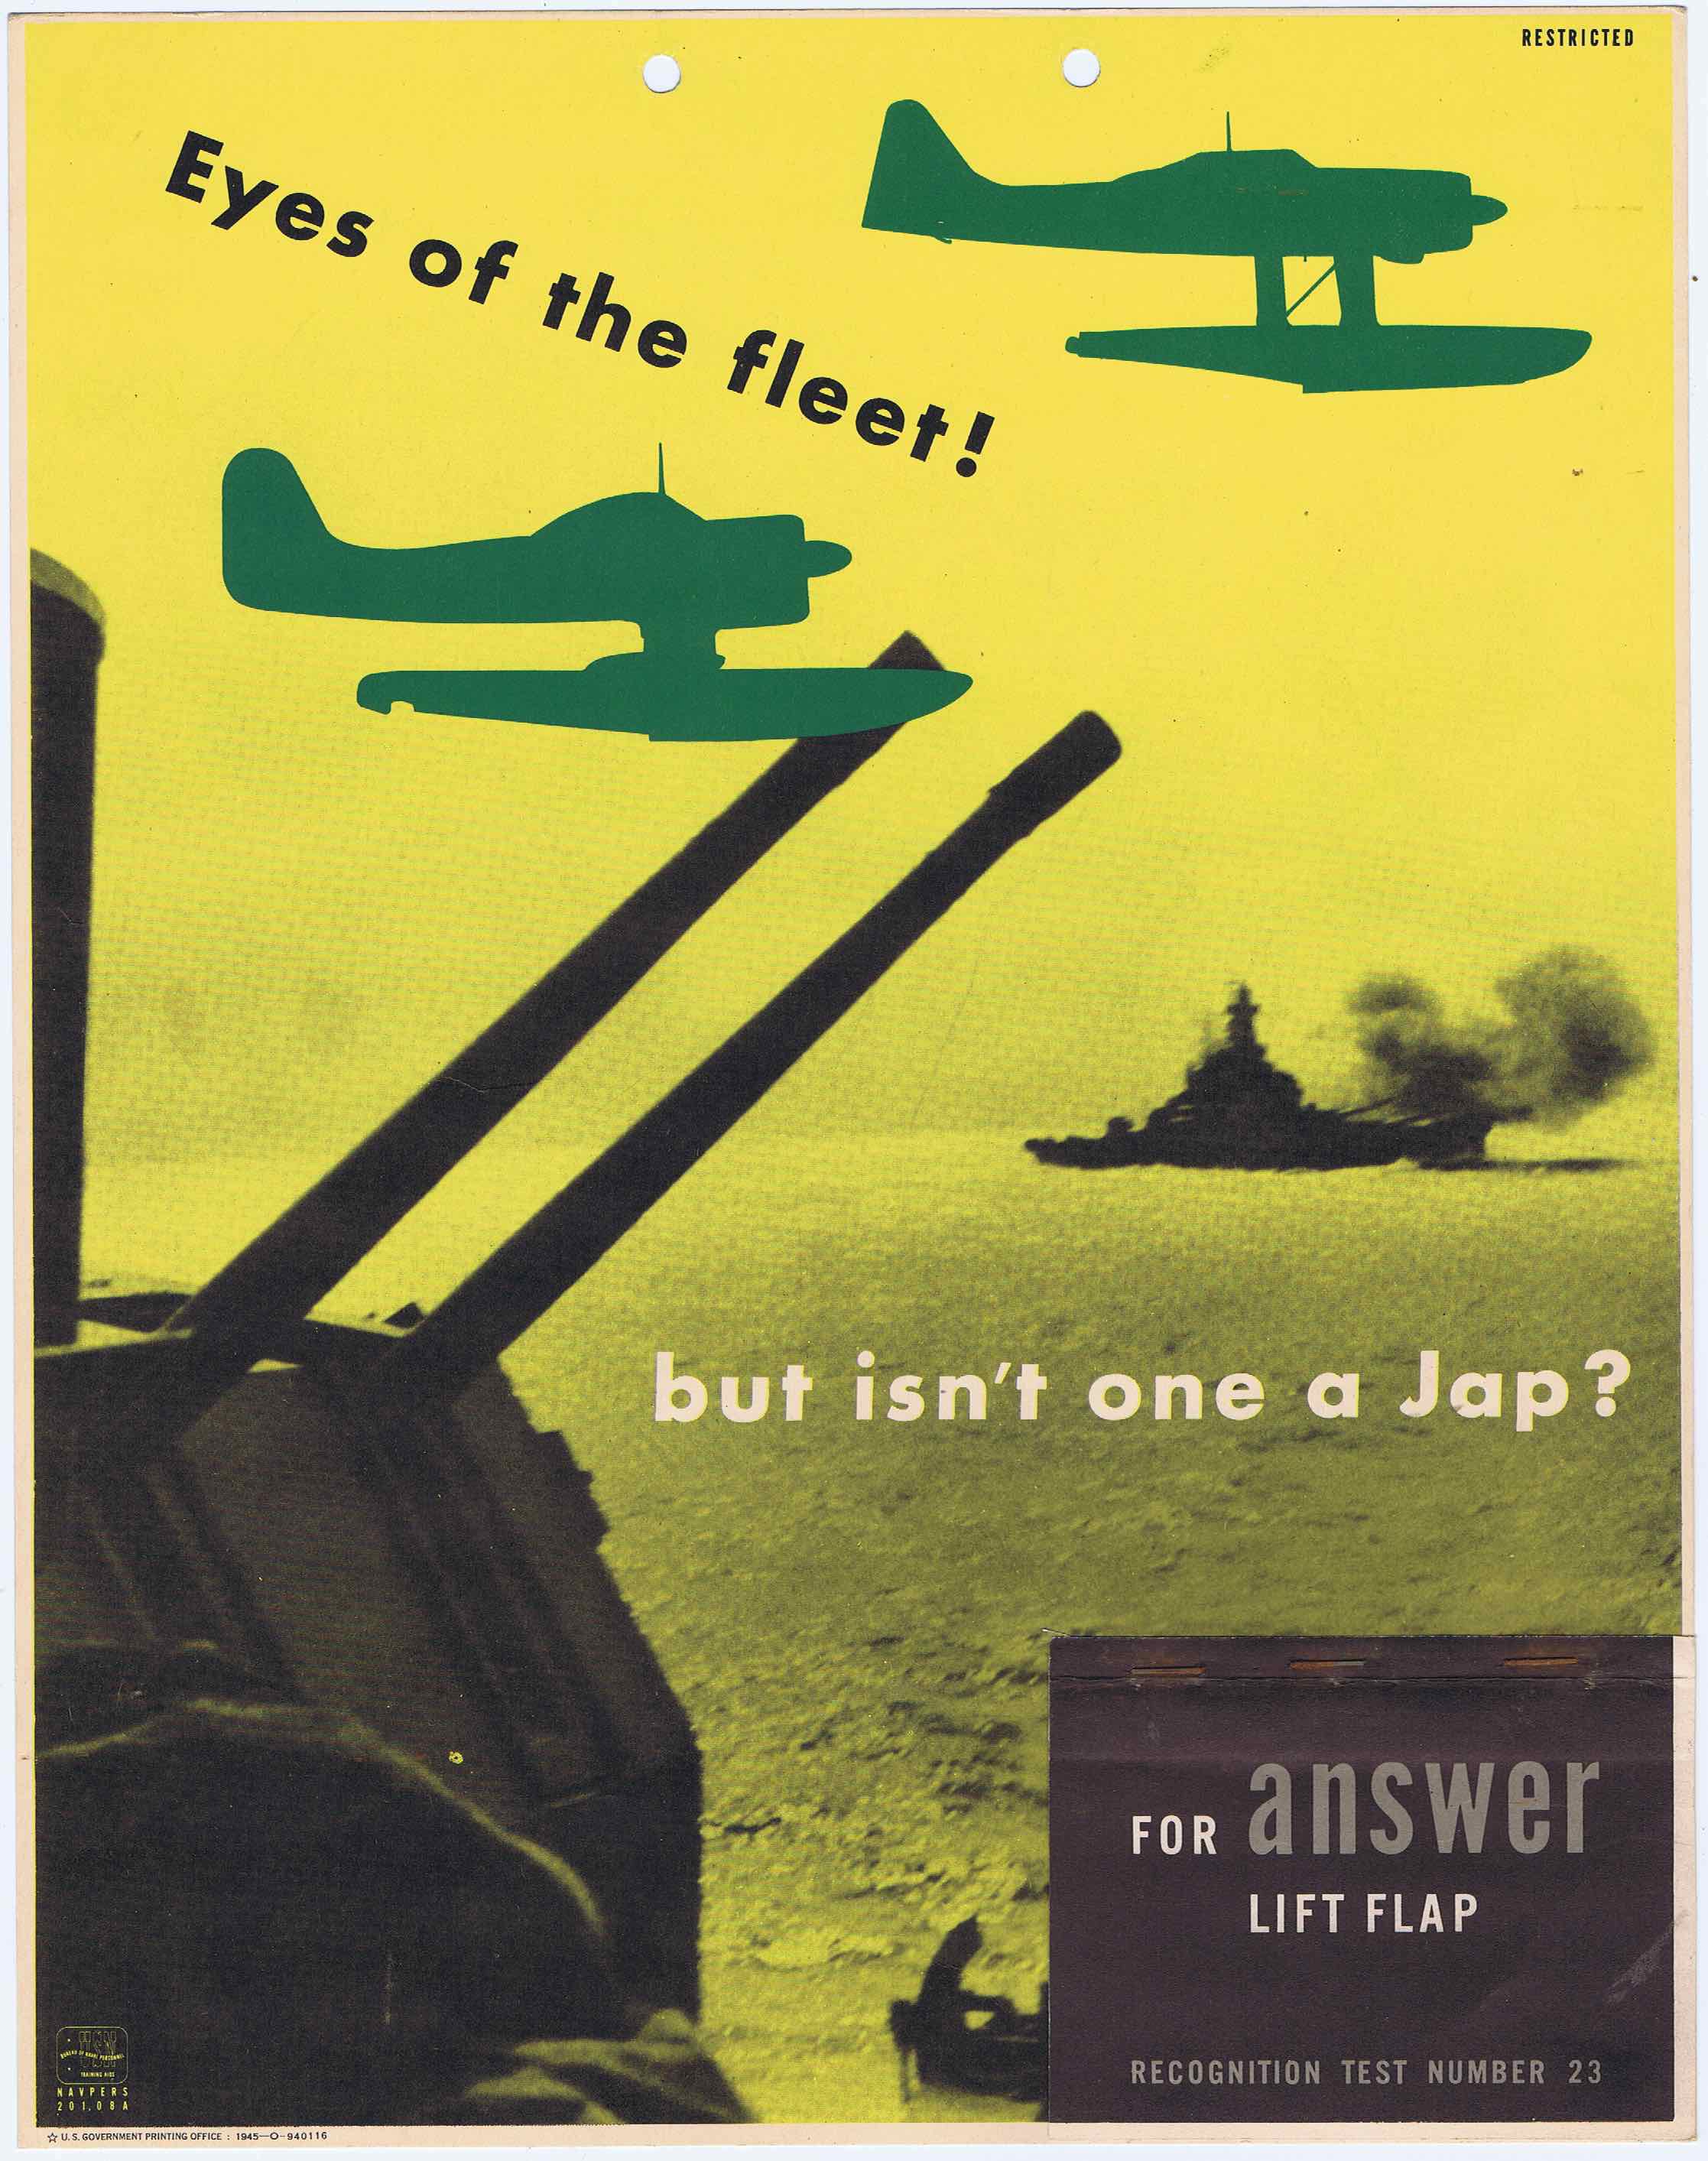 J317	EYES OF THE FLEET - BUT ISN’T ONE A JAP? - U.S. ARMY AIR FORCE RECOGNITION POSTER